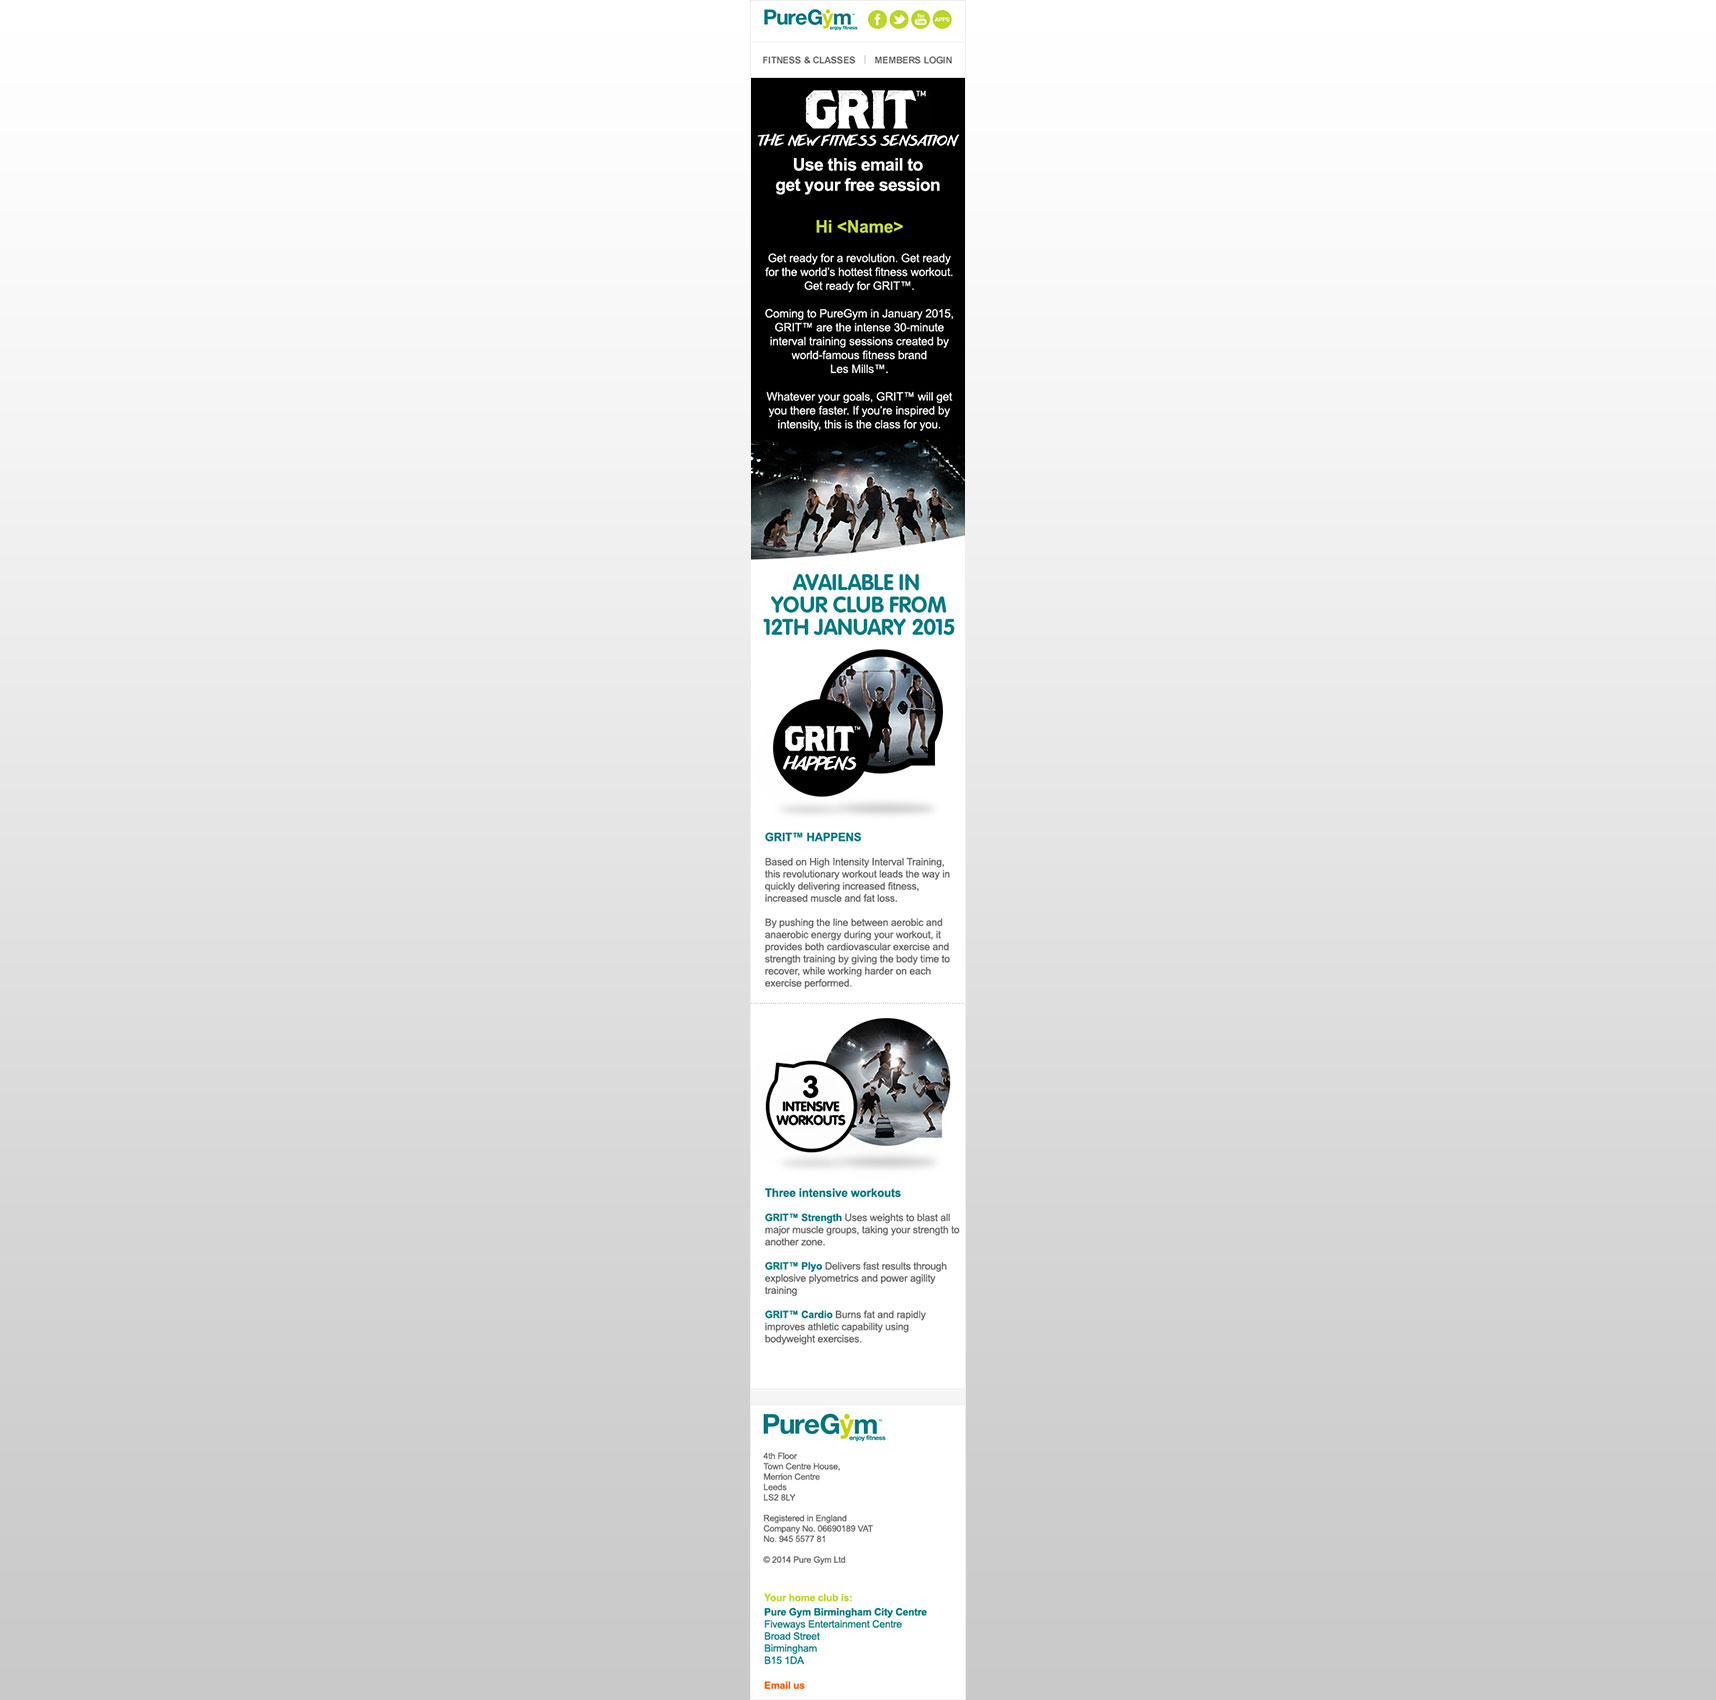 PureGym Marketing: GRIT Email - Mobile